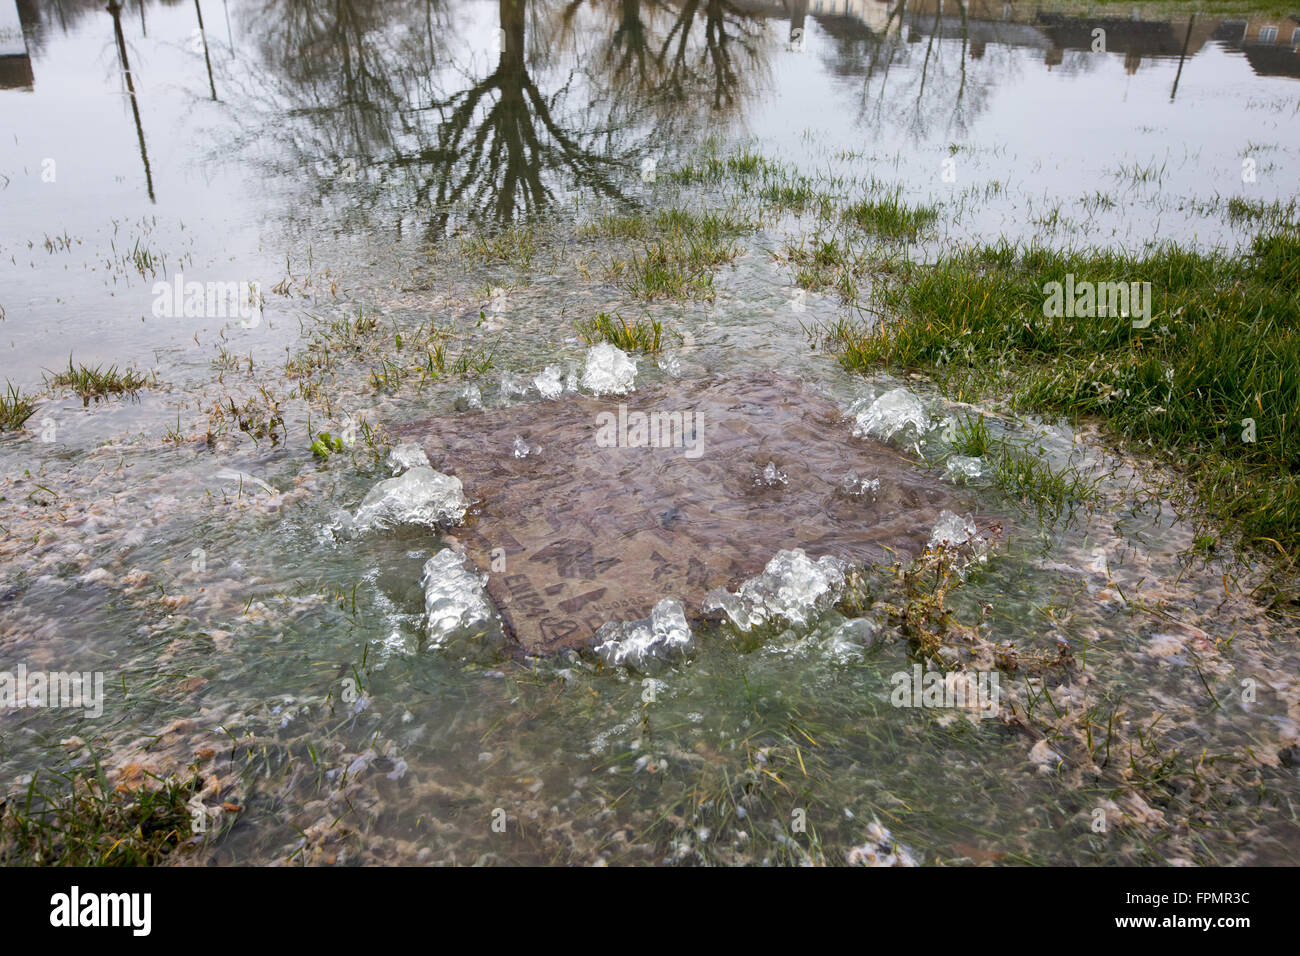 Flooded water coming through a drain,man hole cover. Stock Photo